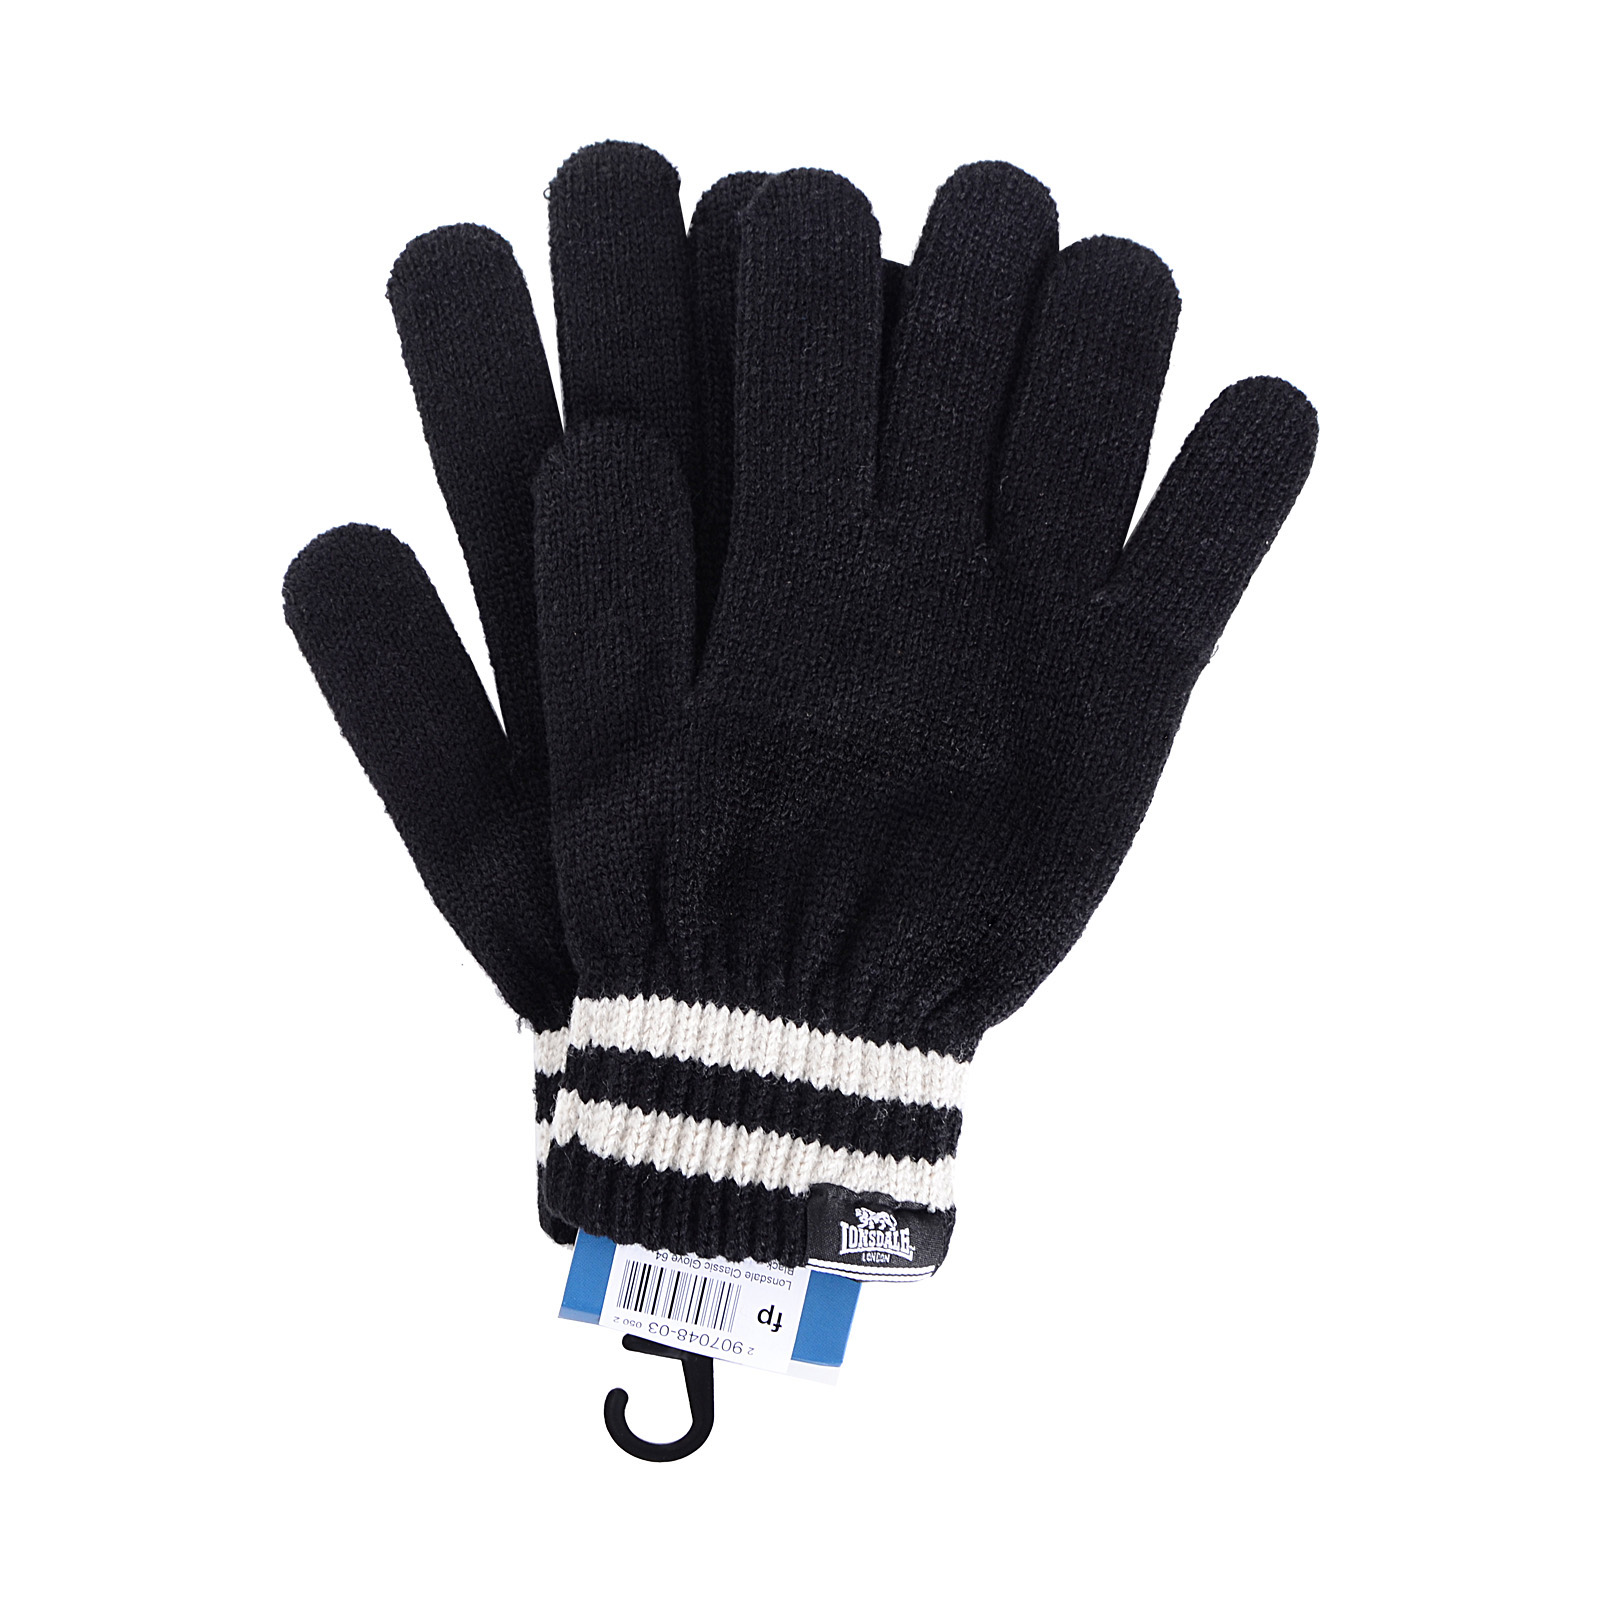 Lonsdale Classic Glove 64 